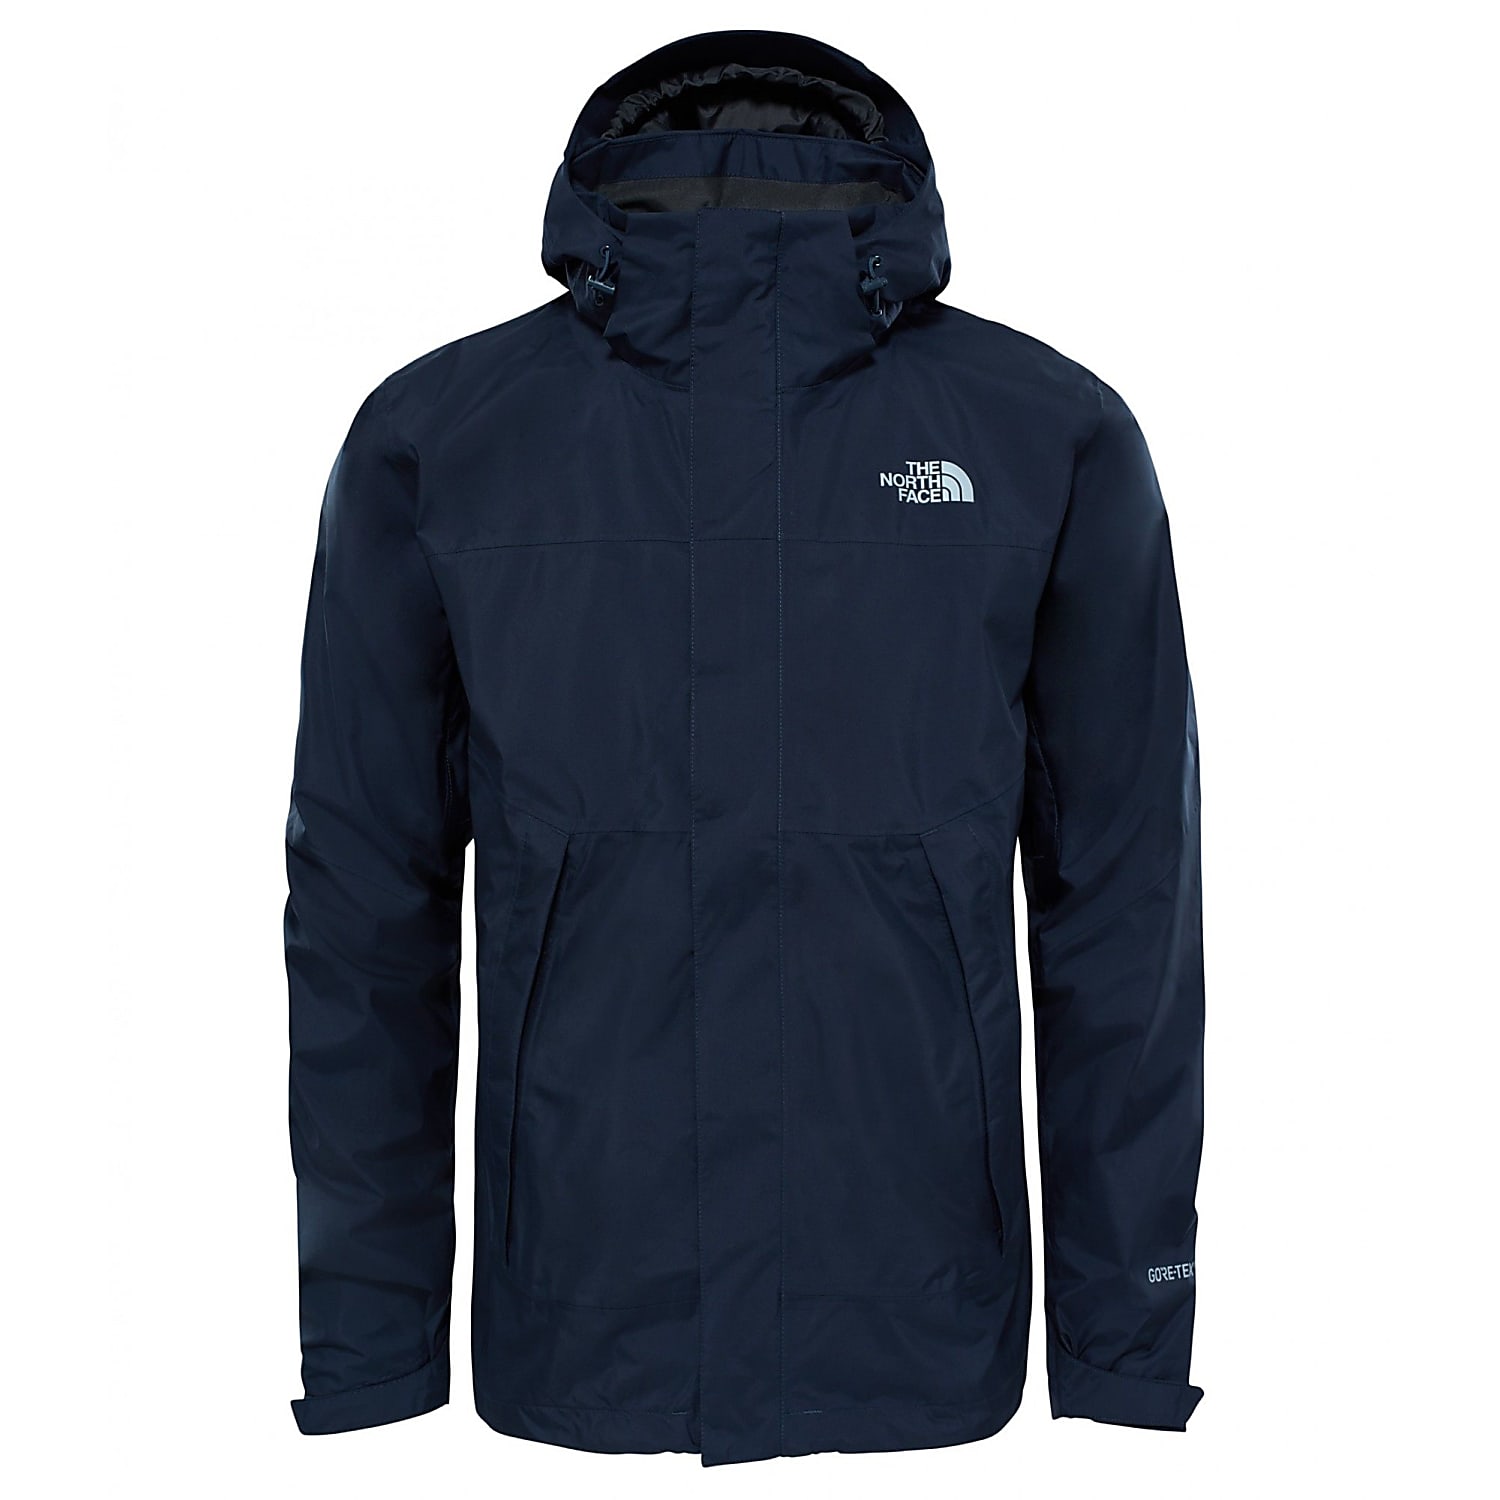 The North Face M MOUNTAIN LIGHT II SHELL JACKET, Urban Navy